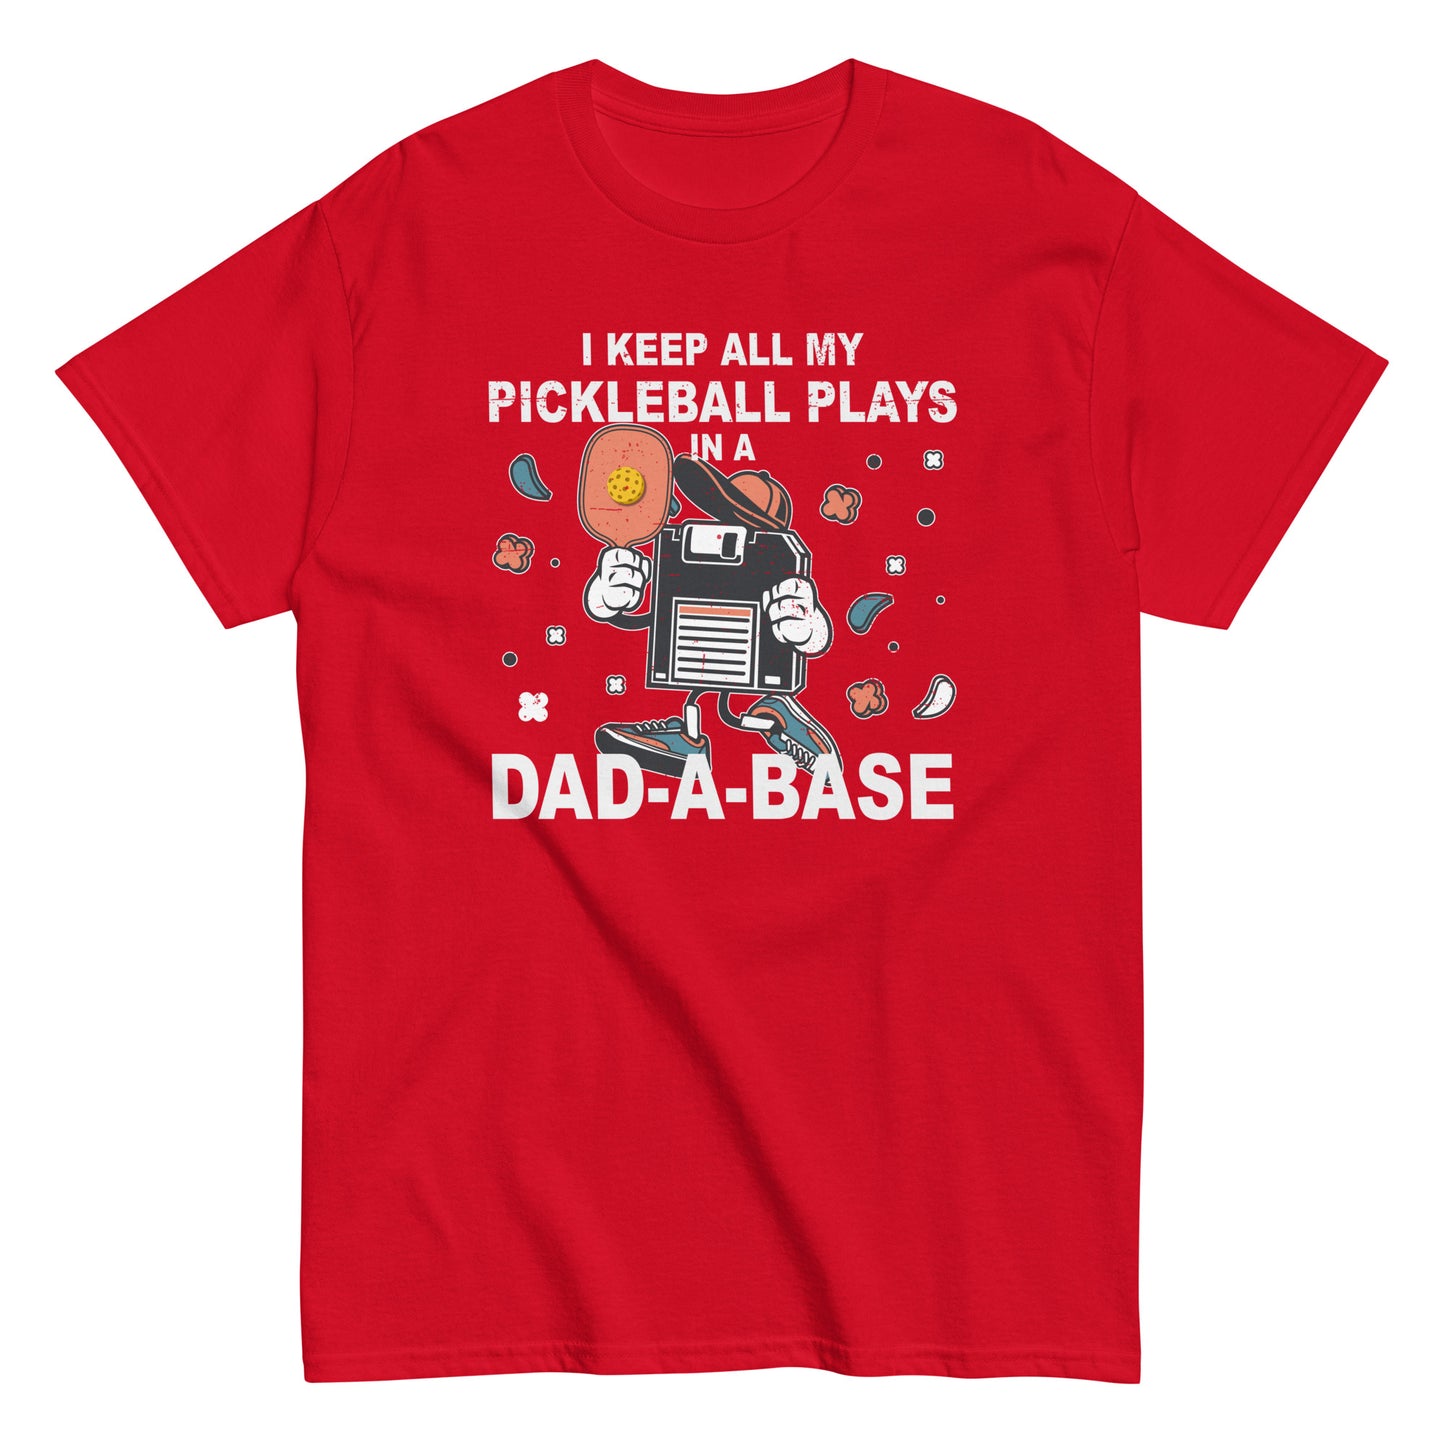 Retro Pickleball Pun: "I Keep All My Pickleball Plays In A Dad-A-Base", Father's Day Mens Red T-Shirt